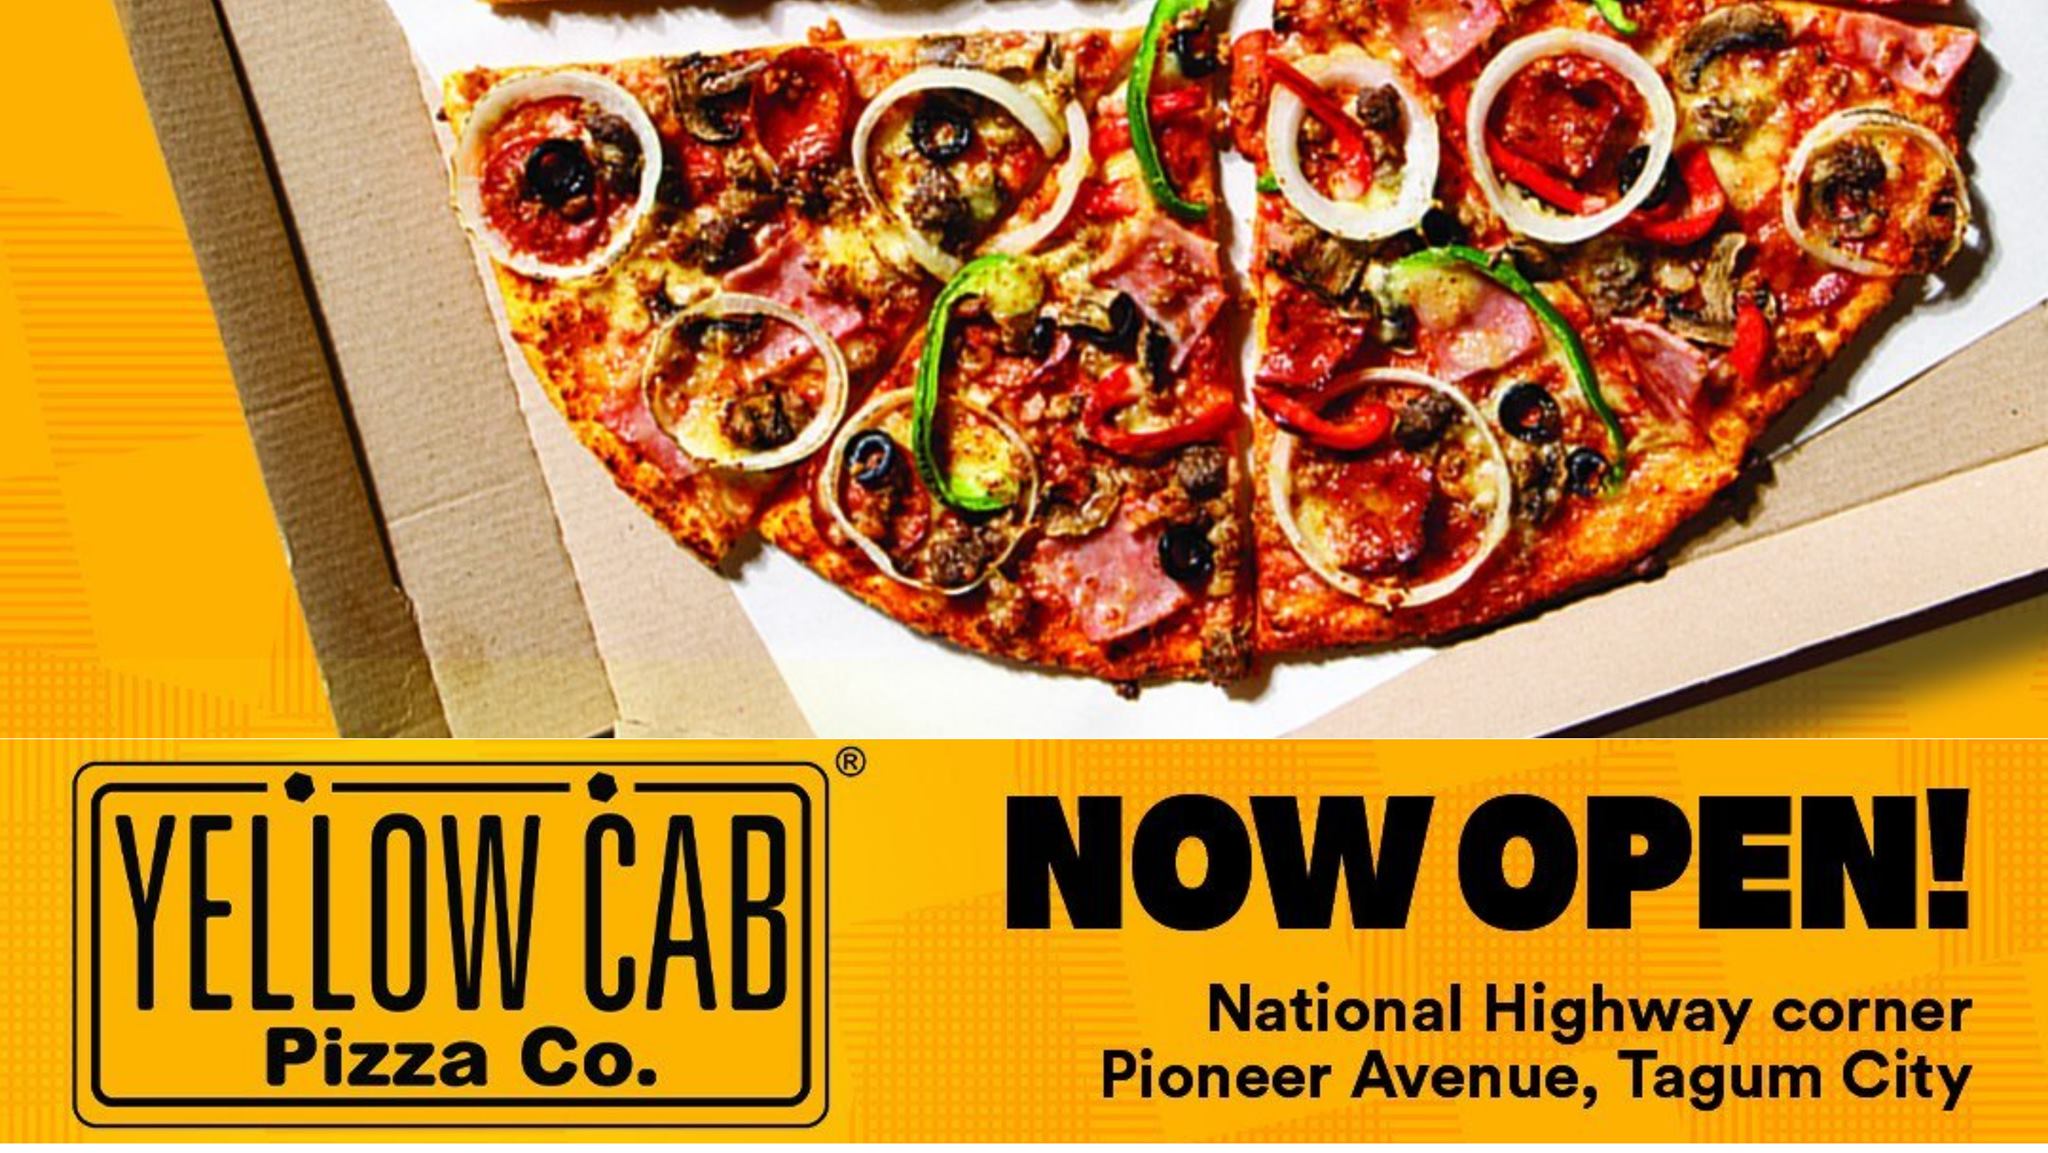 You are currently viewing Yellow Cab Pizza – Tagum City